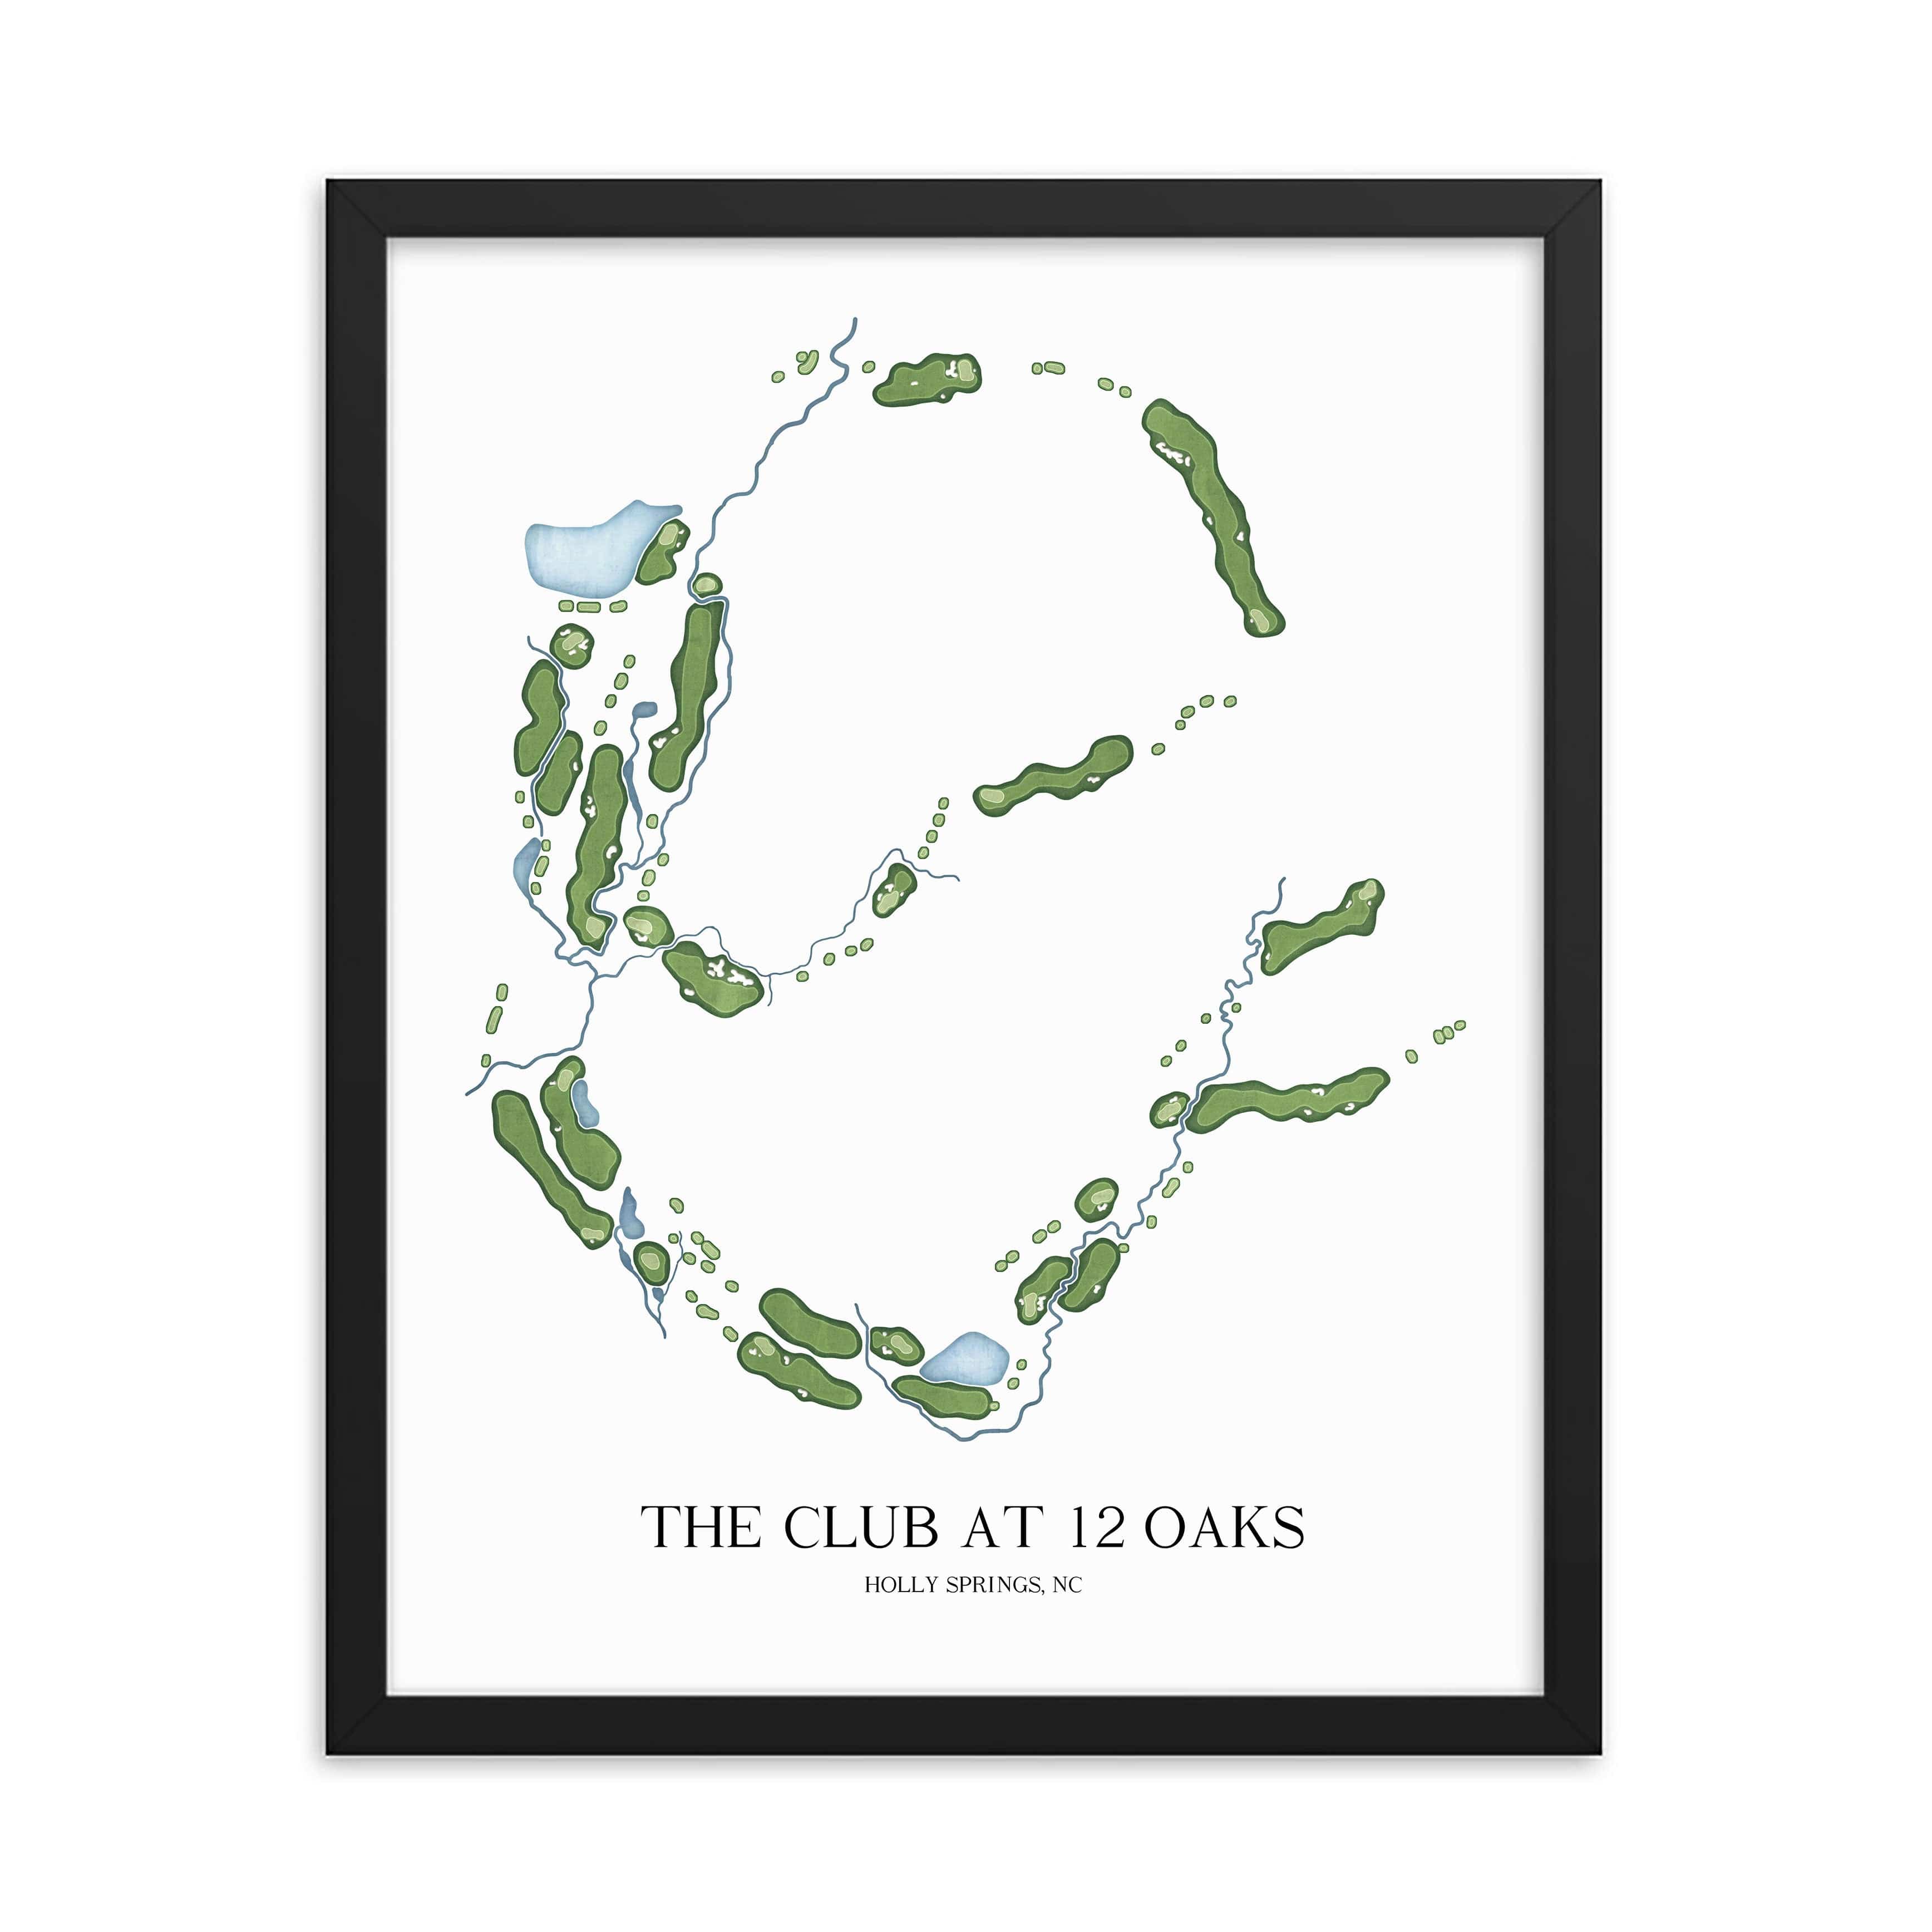 The 19th Hole Golf Shop - Golf Course Prints -  The Club at 12 Oaks Golf Course Map